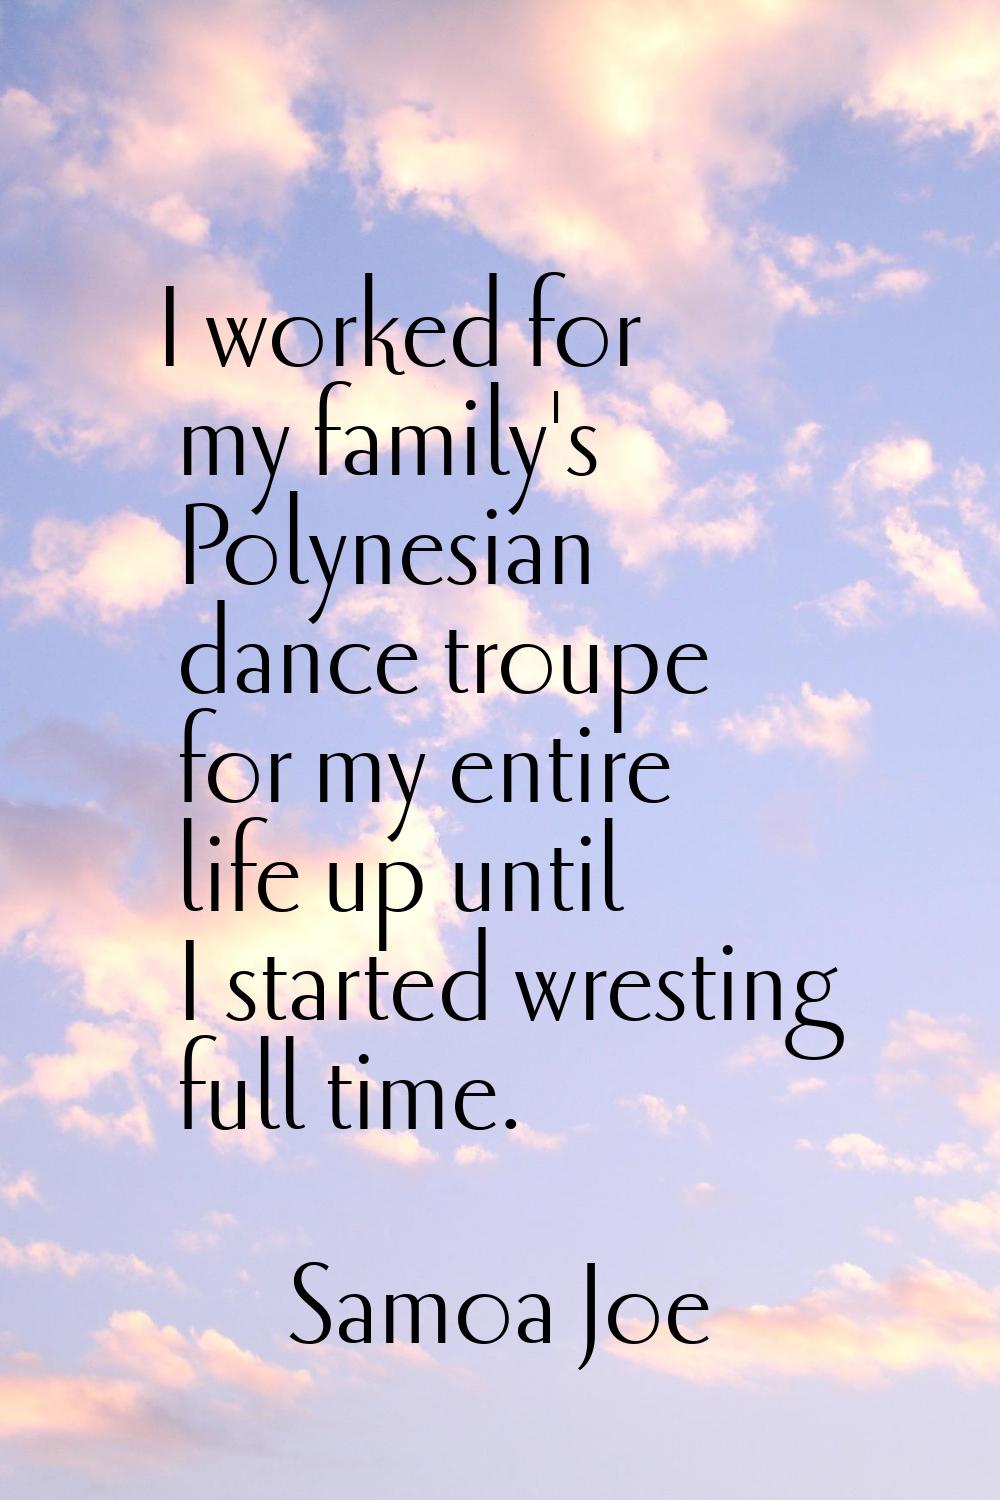 I worked for my family's Polynesian dance troupe for my entire life up until I started wresting ful